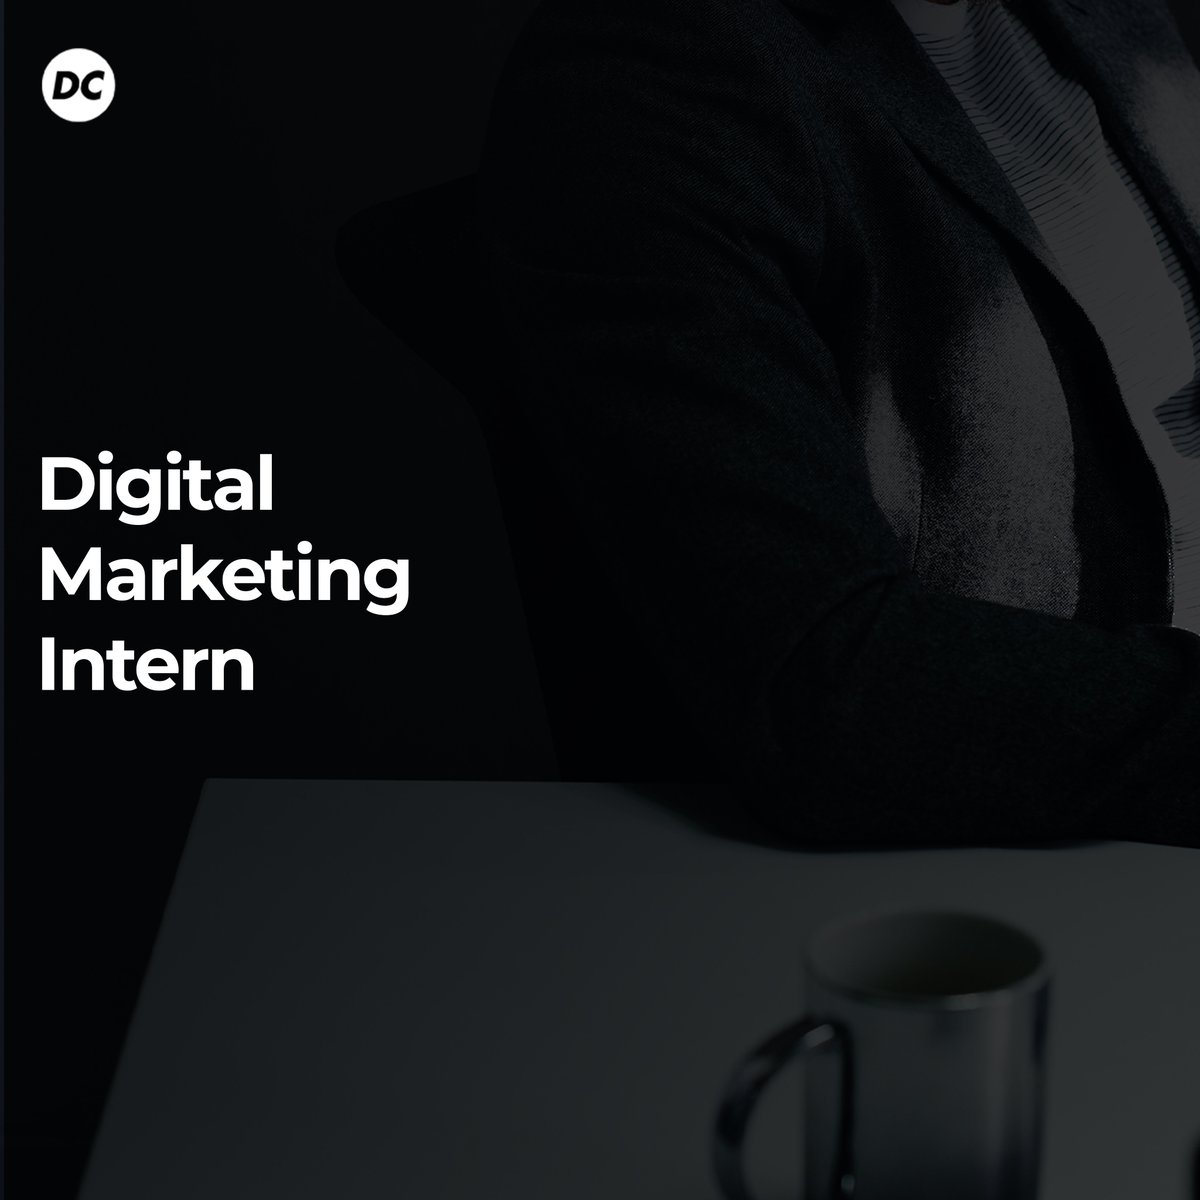 We're hiring a Digital Marketing Intern to join our Marketing team.

You'll assist in developing and implementing marketing campaigns across various digital channels and gain experience in data analysis, content creation, and marketing strategy.

docs.google.com/document/d/1-u…

#TechJob